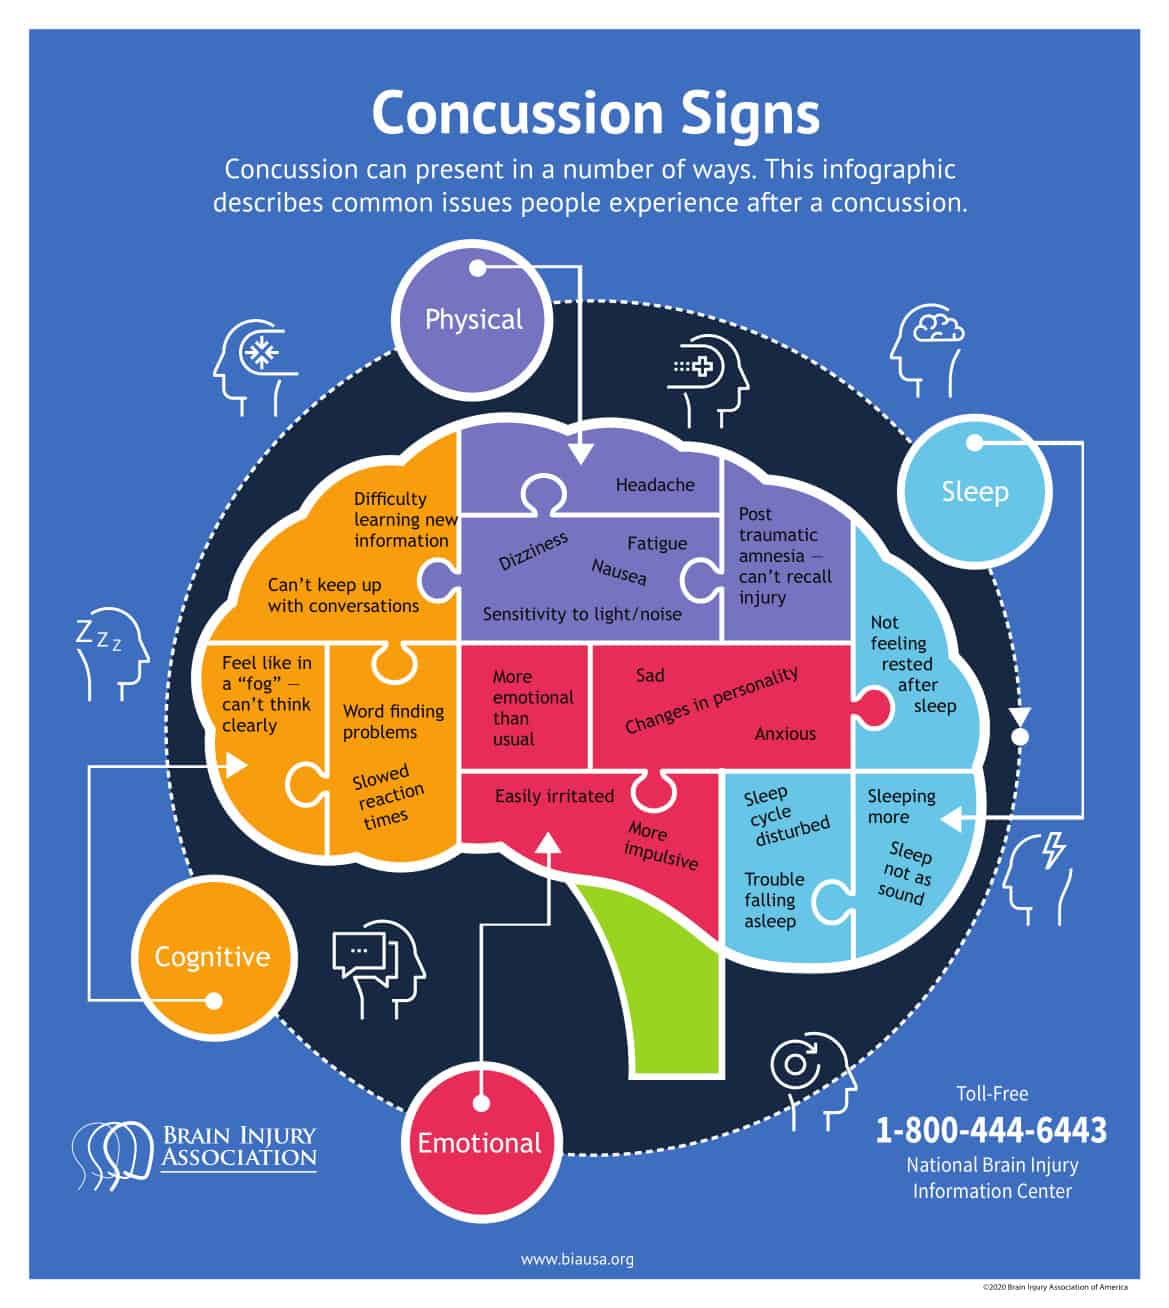 Learn how to detect plausible concussions